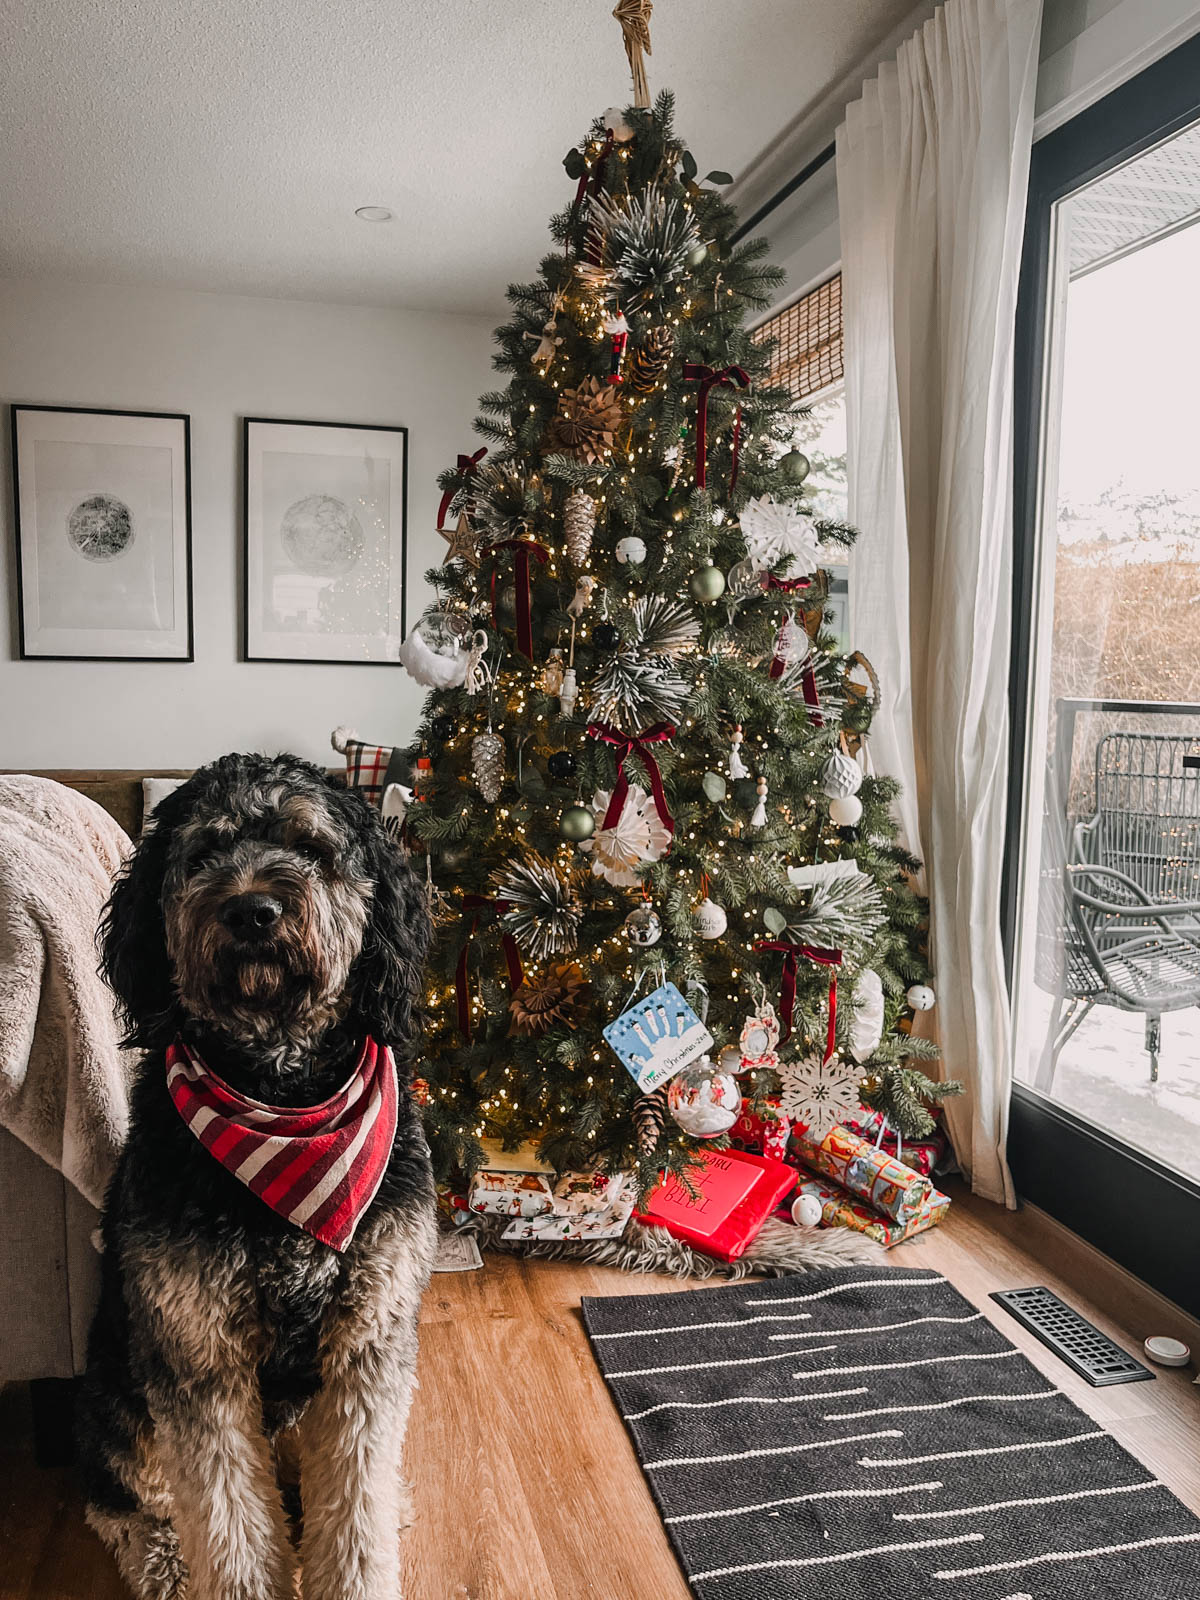 13 DIY Christmas ornaments to try- image of dog sitting beside christmas tree